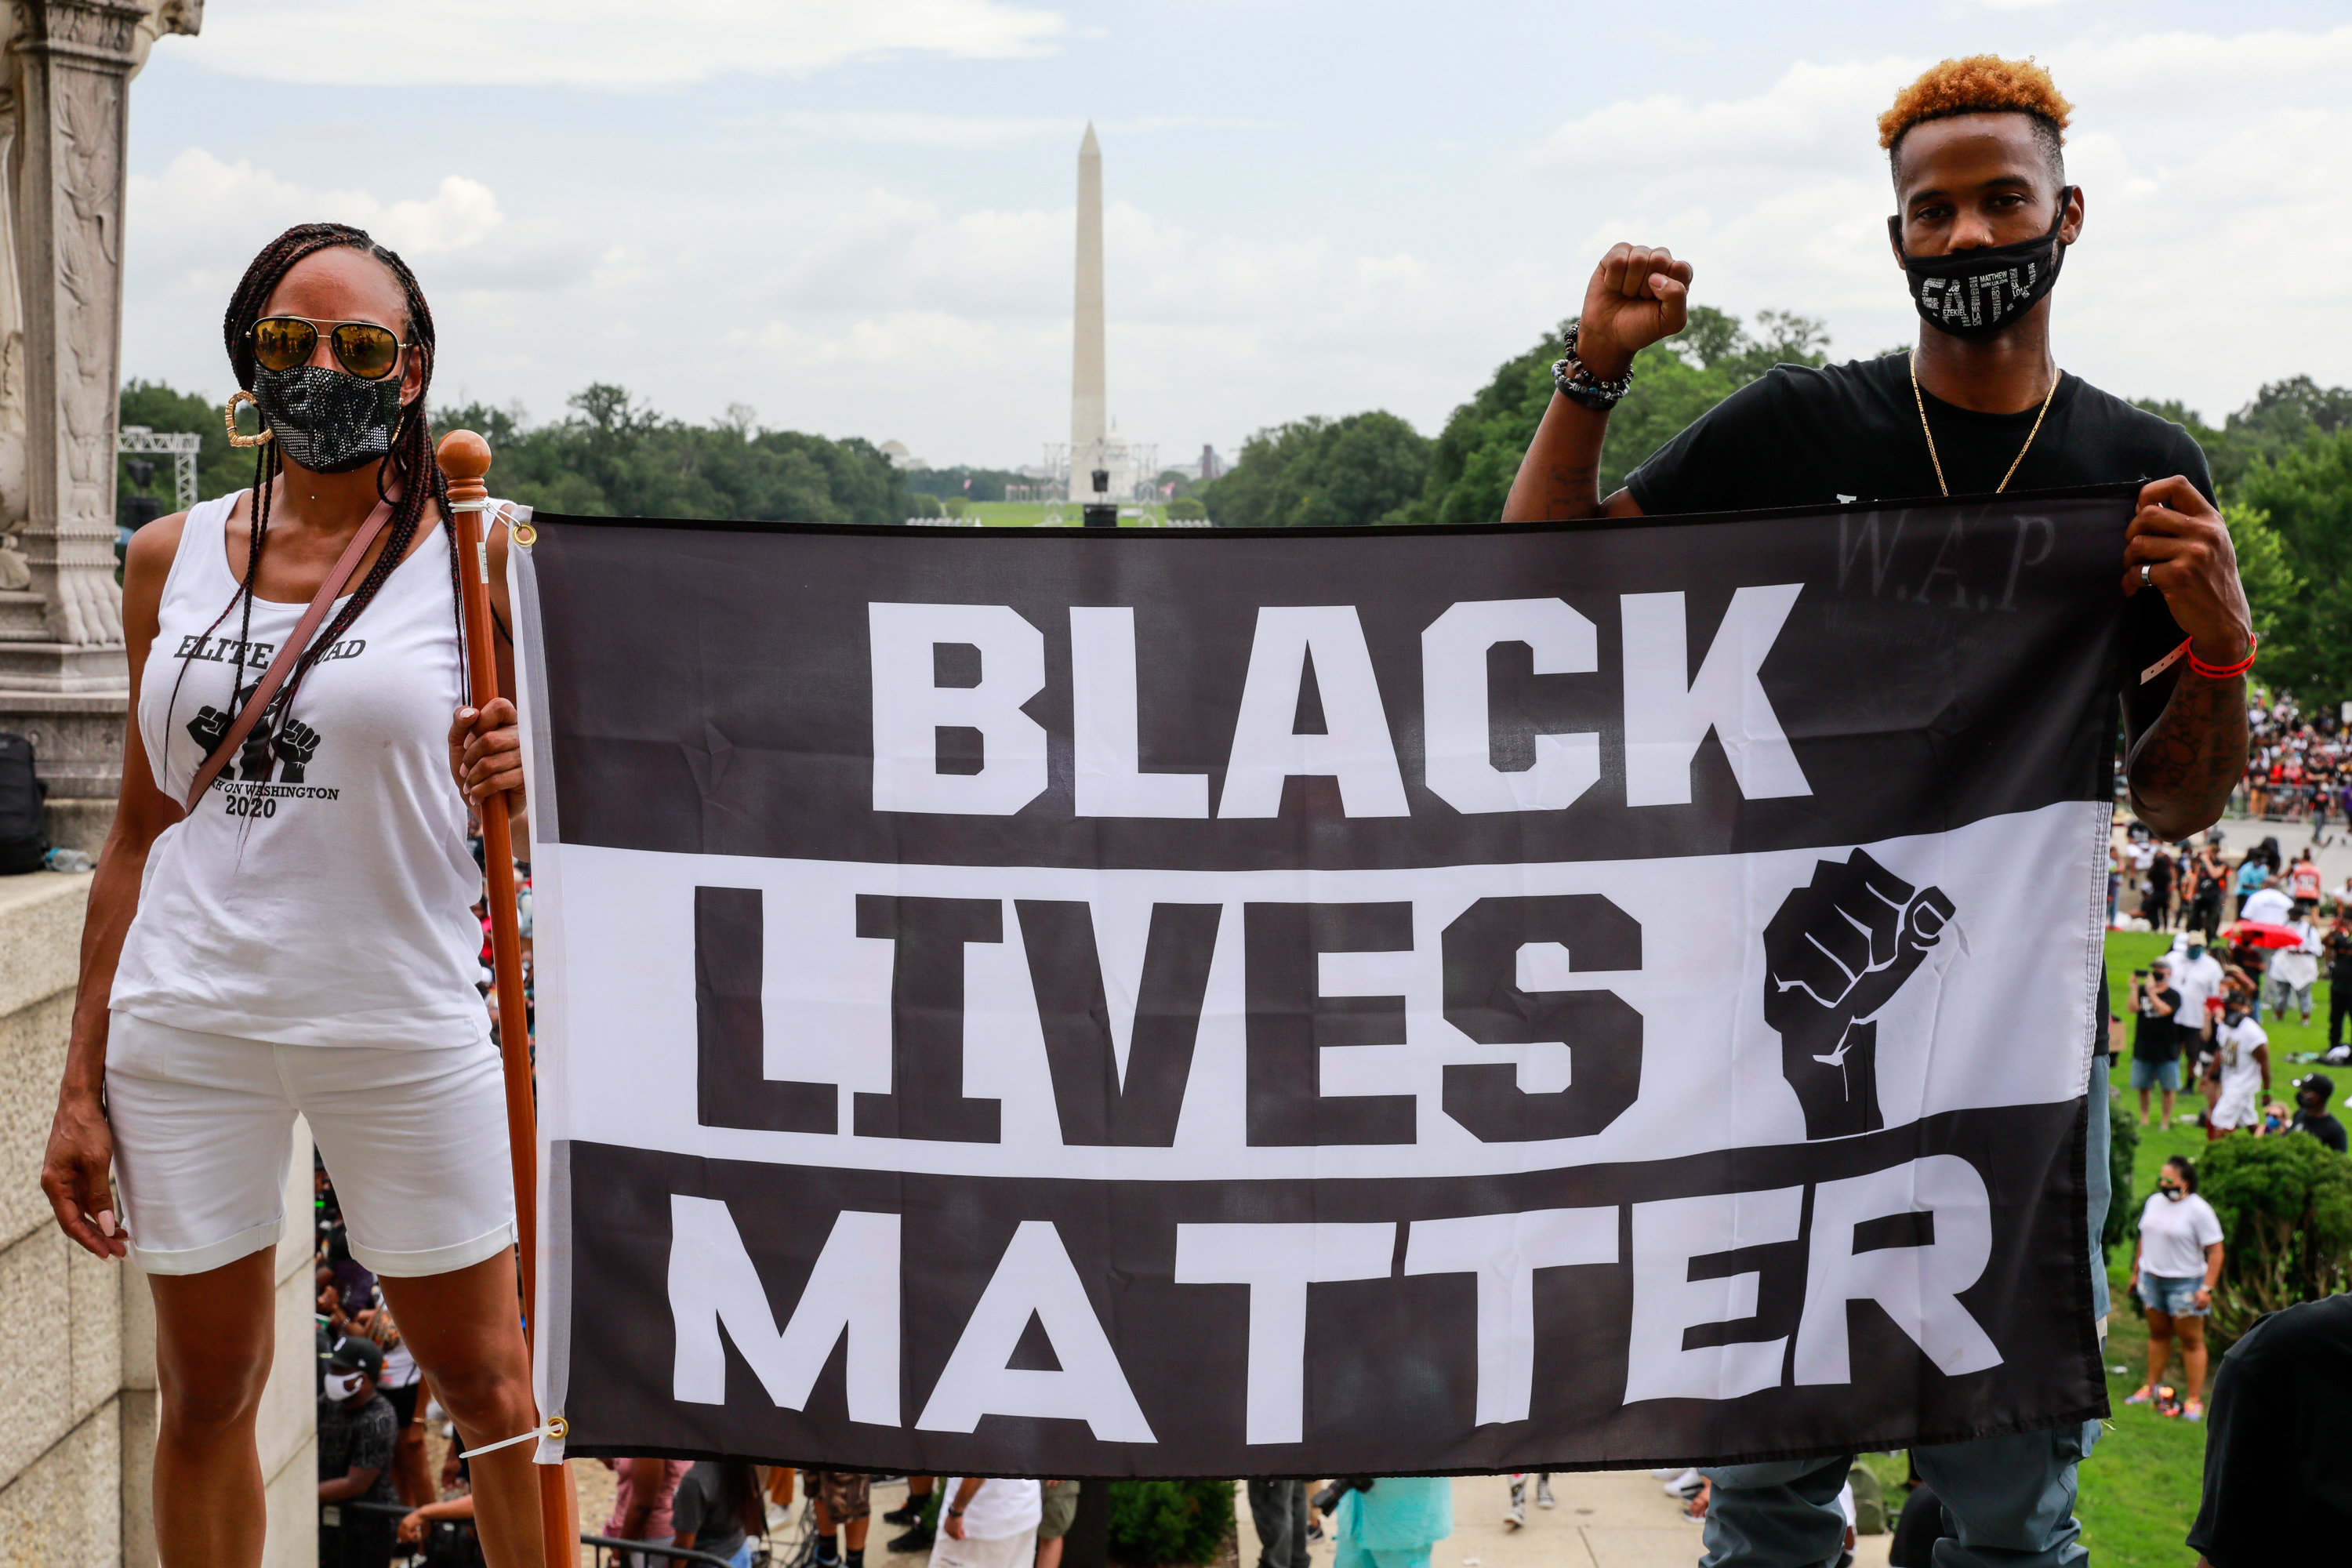 Protesters hold a sign in support of Black Lives Matter during the Commitment March on August 28, 2020 in Washington, DC.